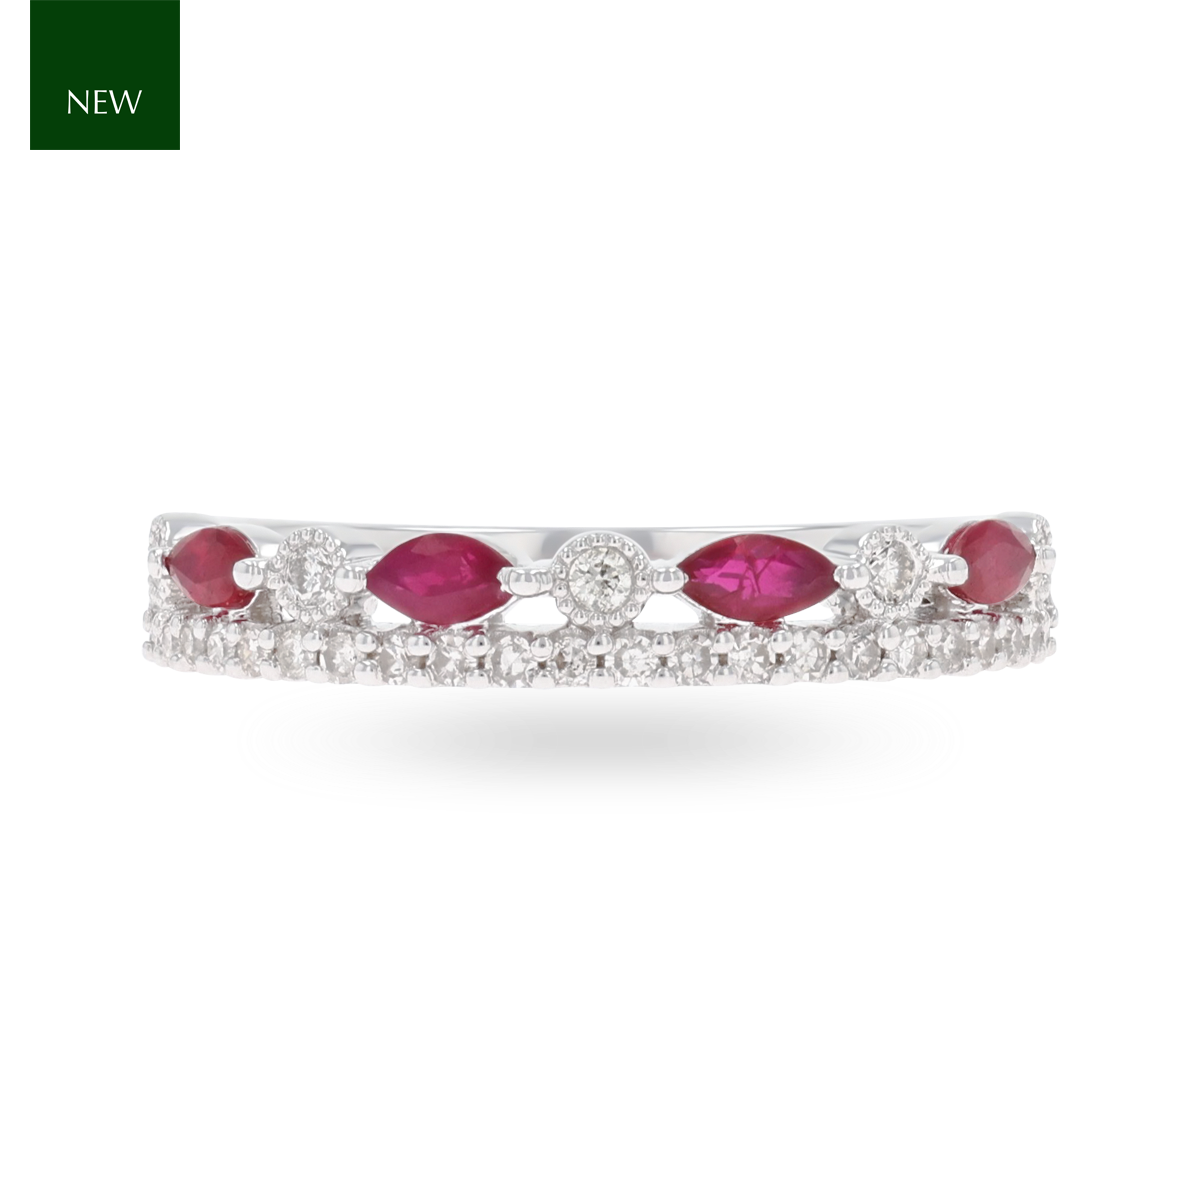 9ct White Gold Marquise Shaped Ruby & Diamond Ring